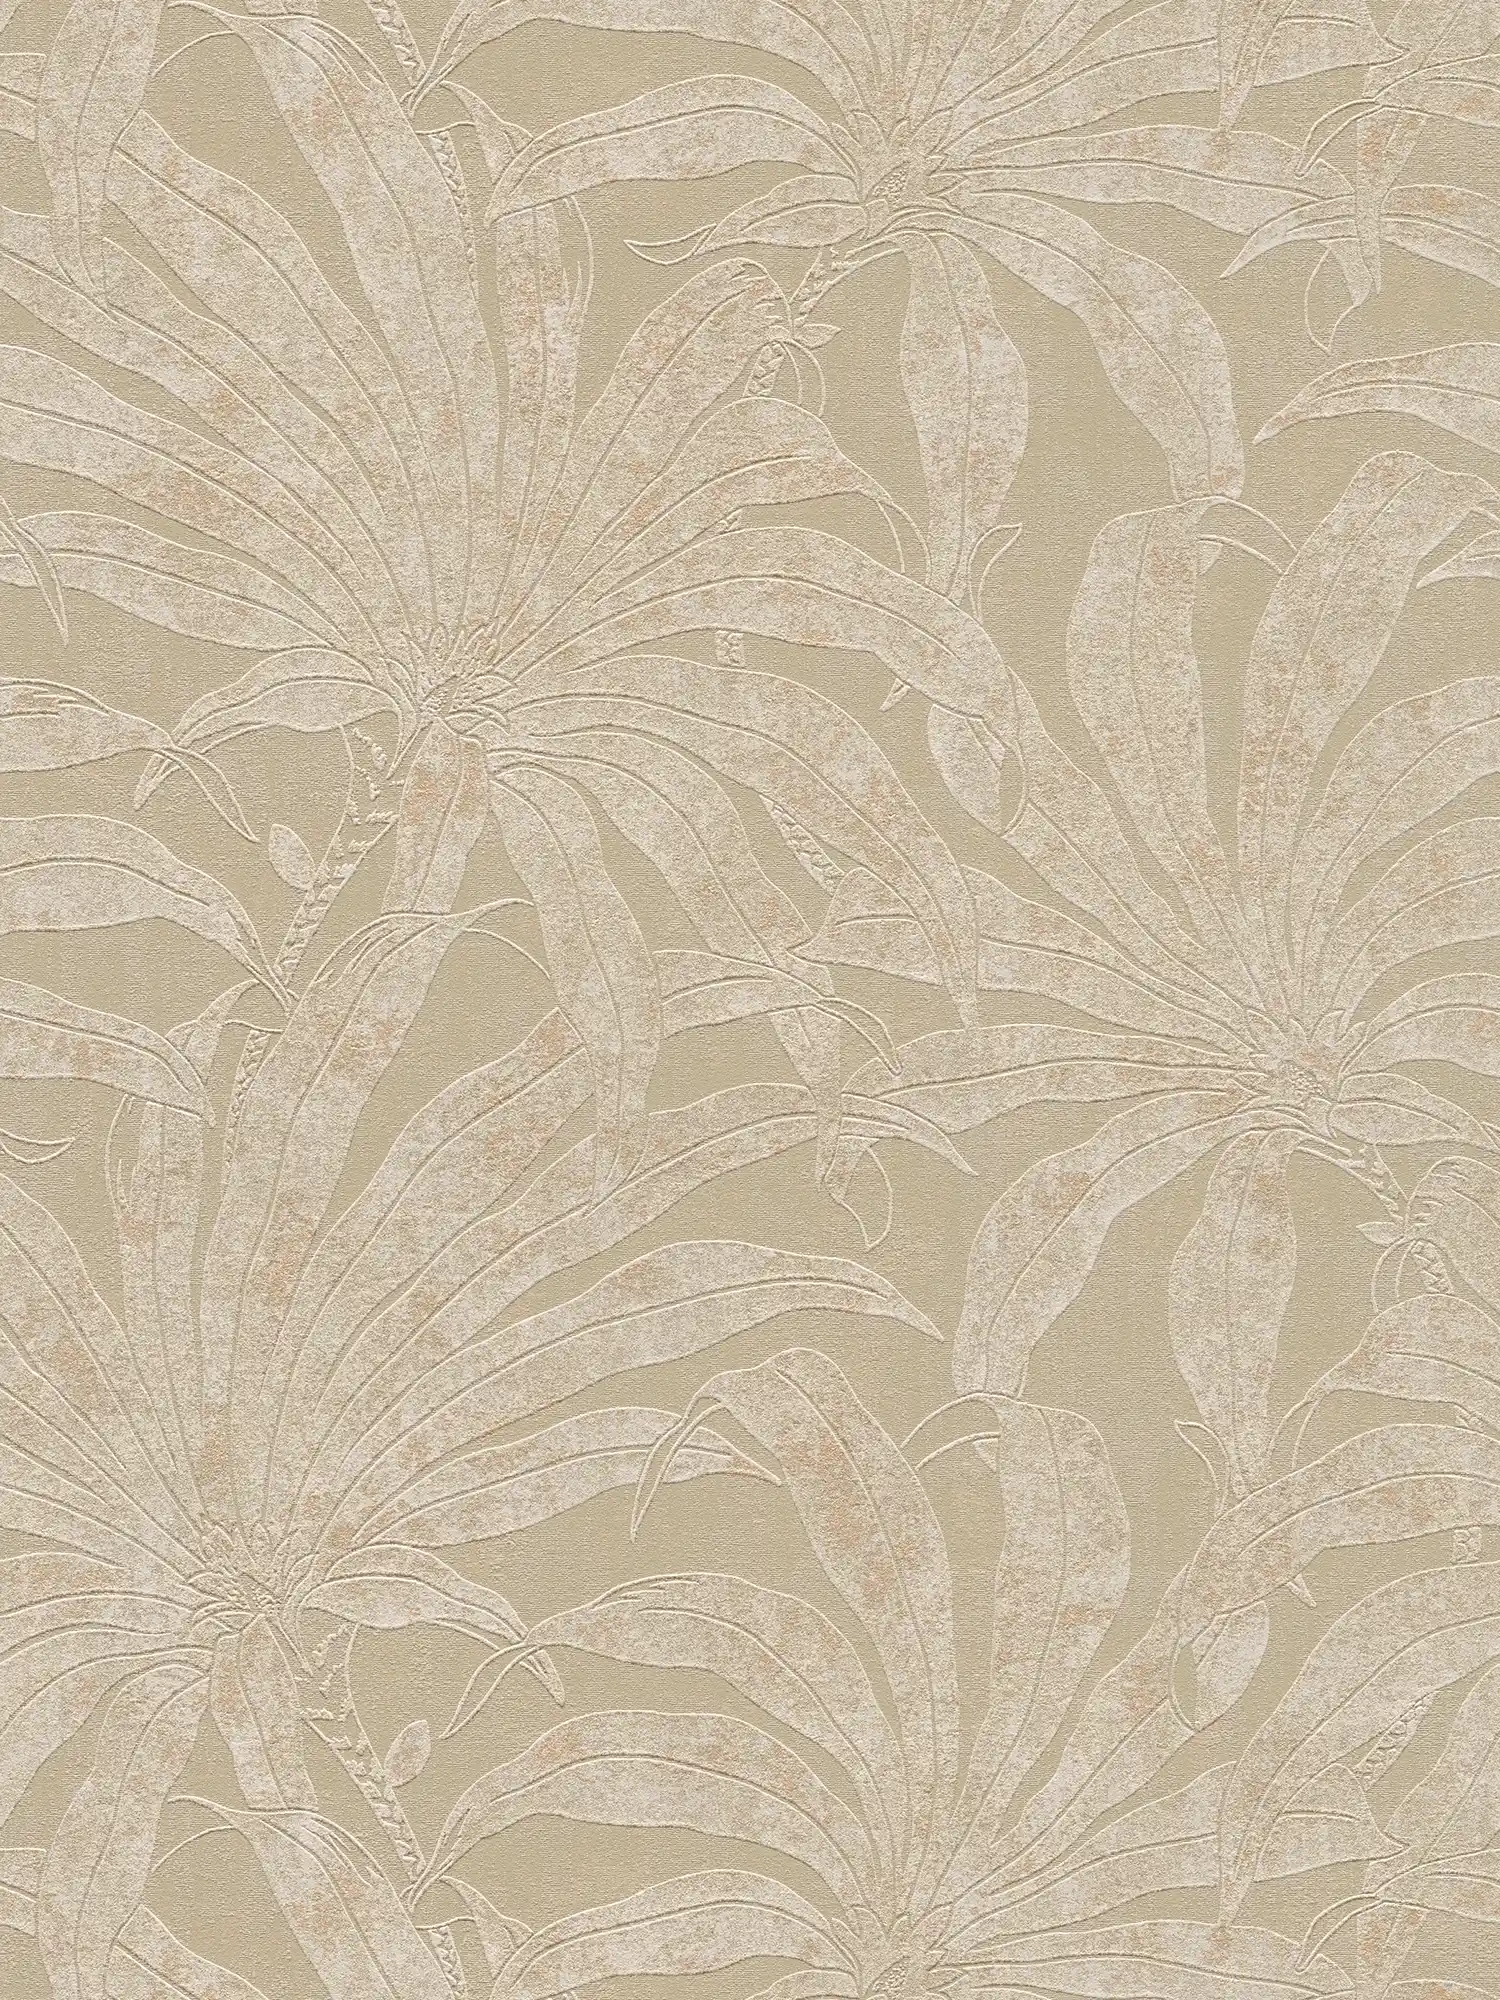 Pattern wallpaper with botanical jungle leaves - grey , white, gold
